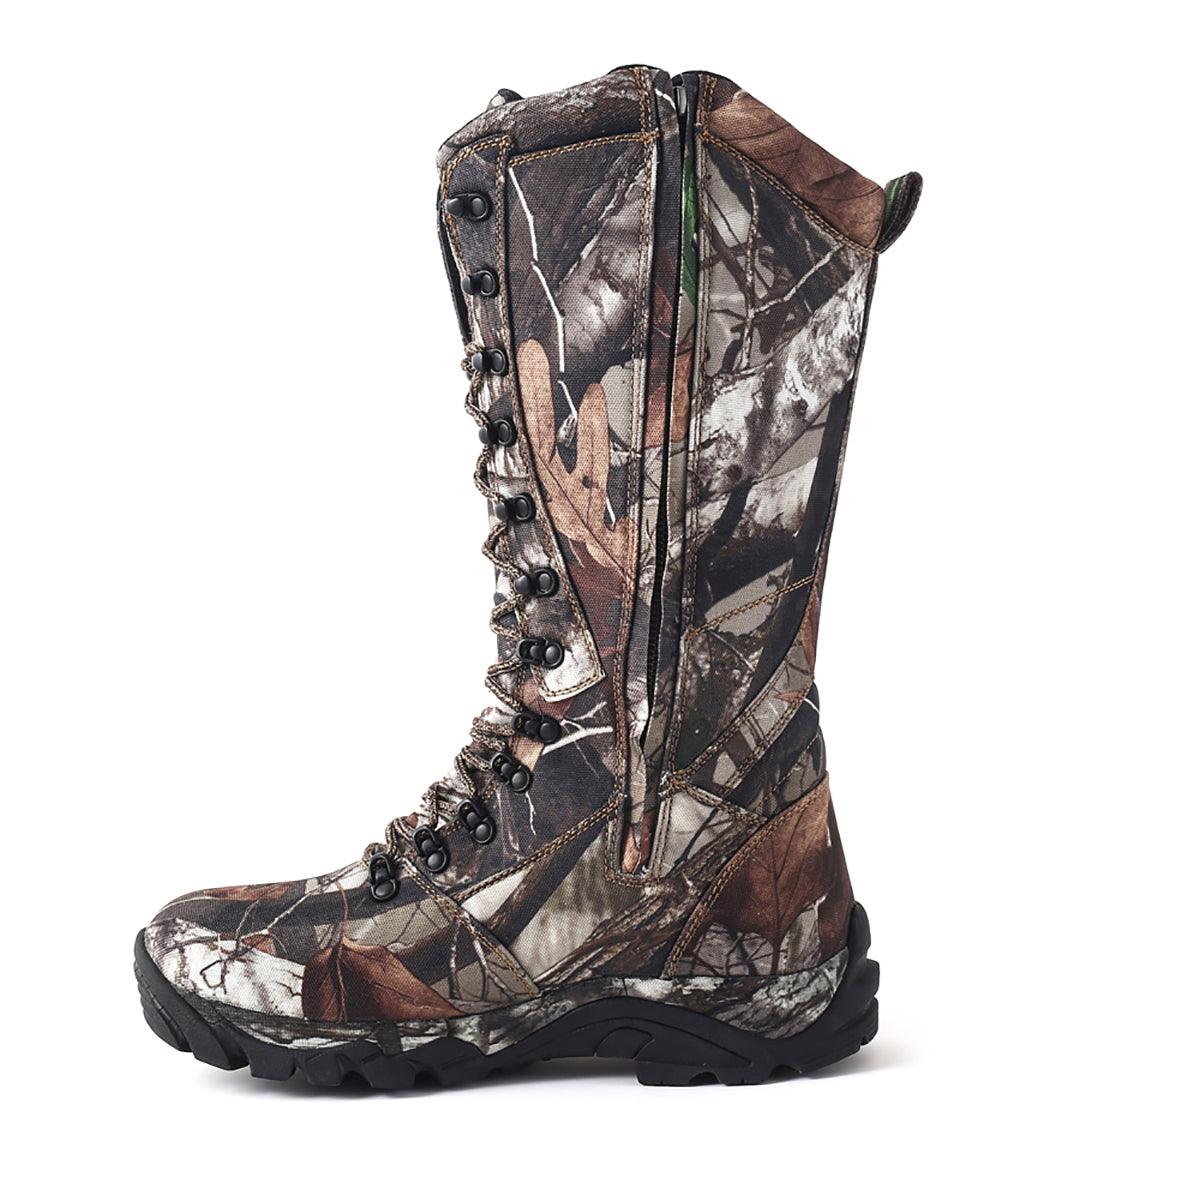 waterproof snake boots for hunting